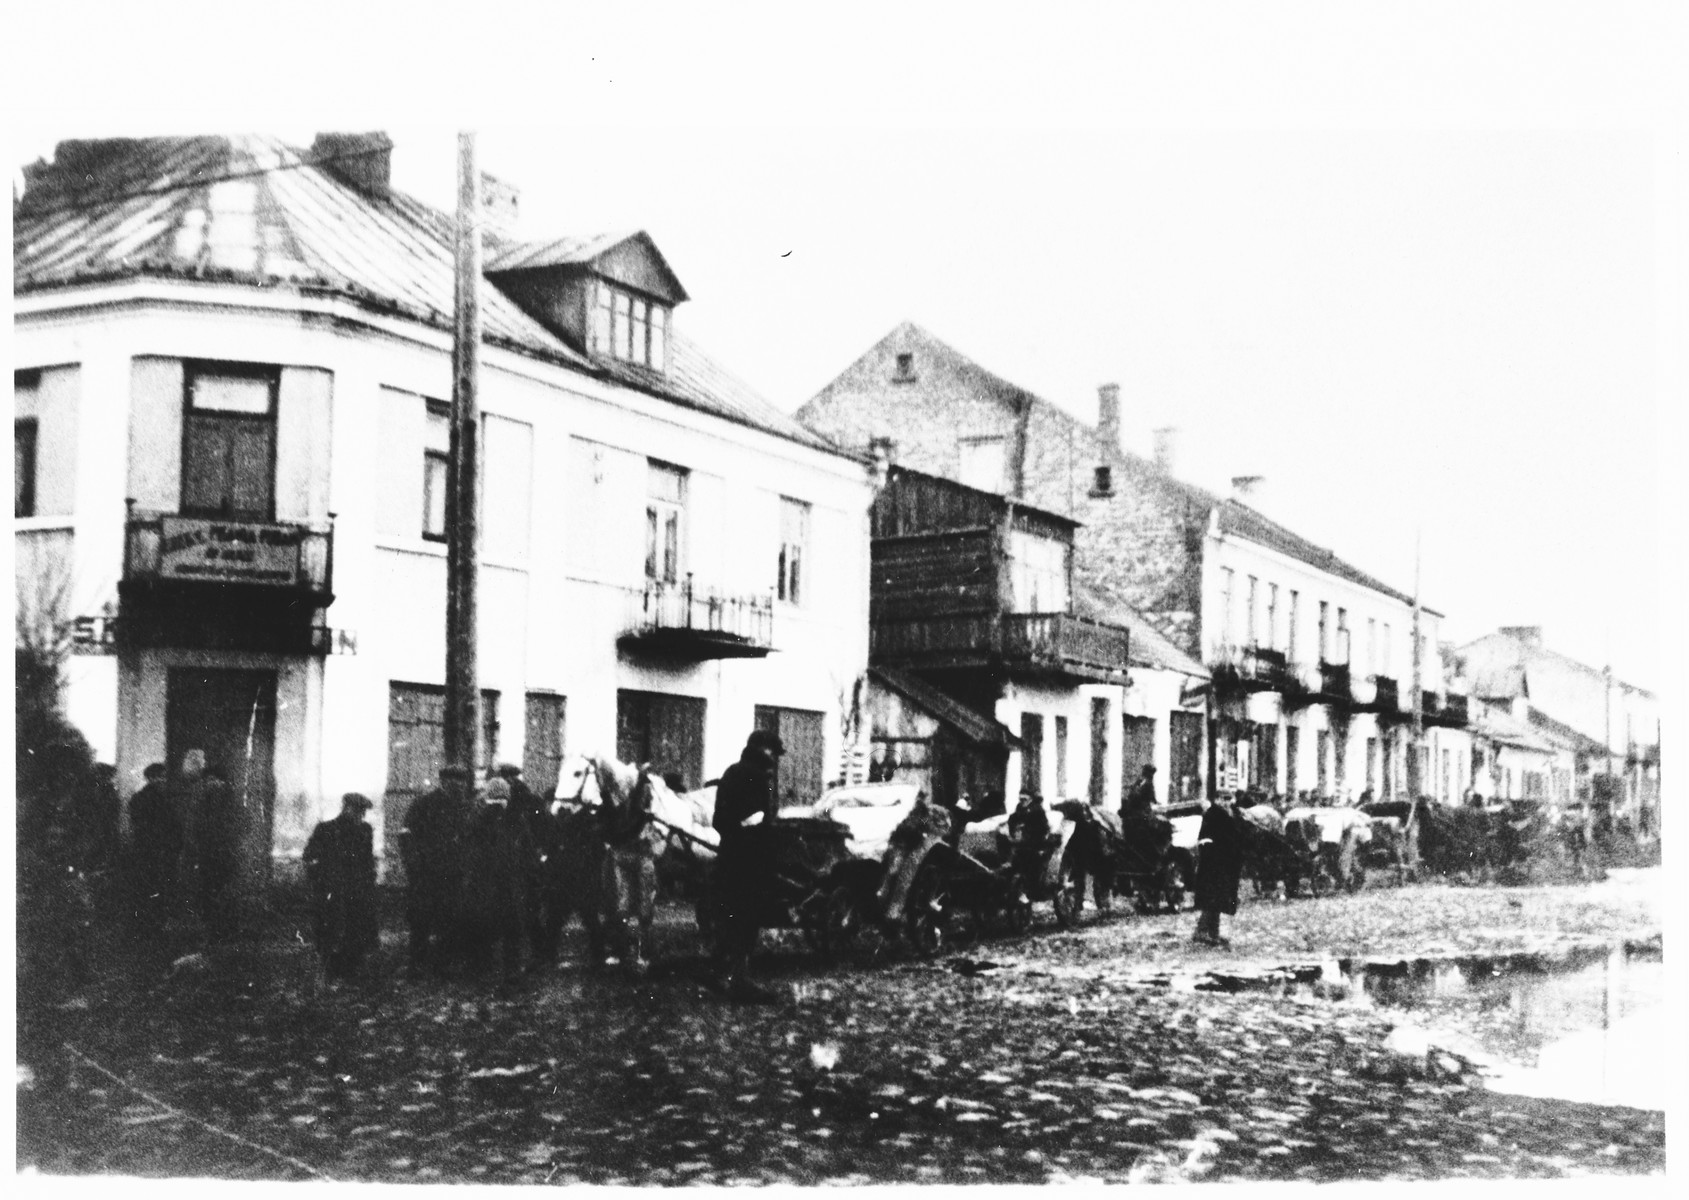 Horse and wagons line the street of an unidentified ghetto.